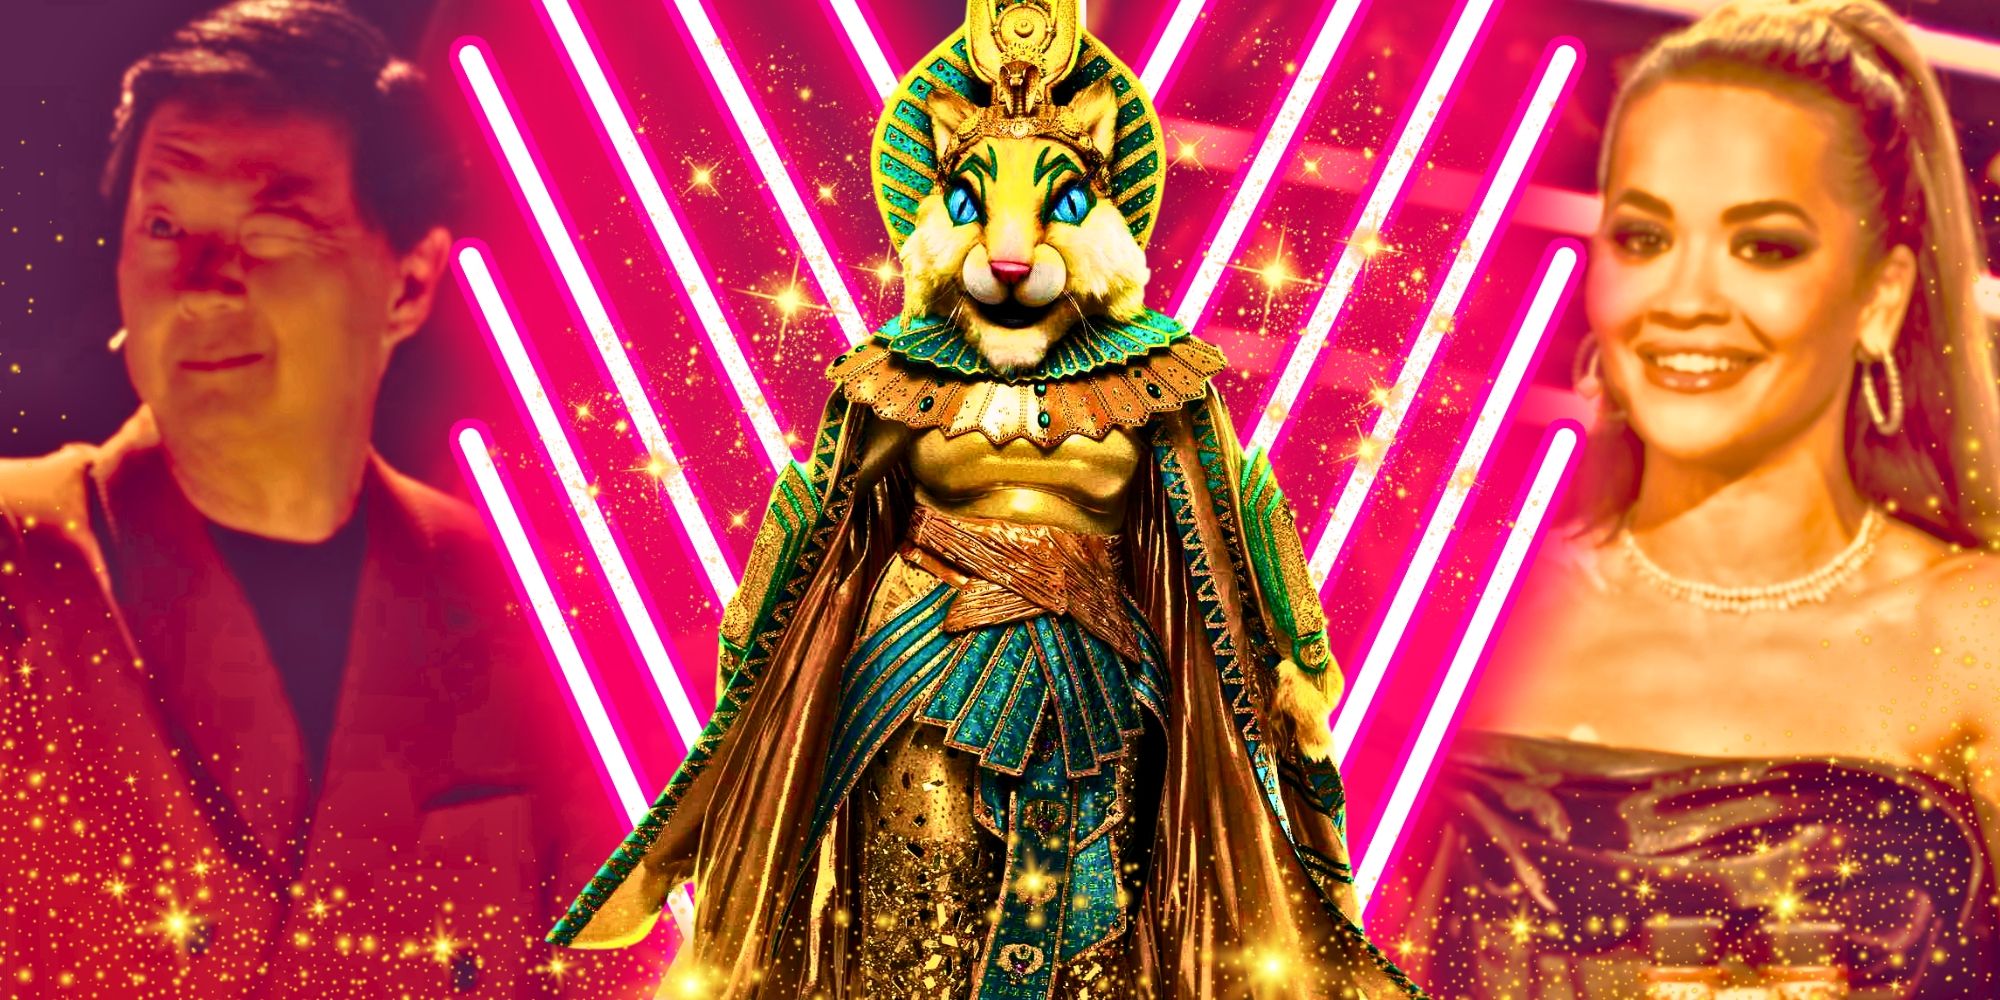 The Masked Singer's Miss Cleocatra